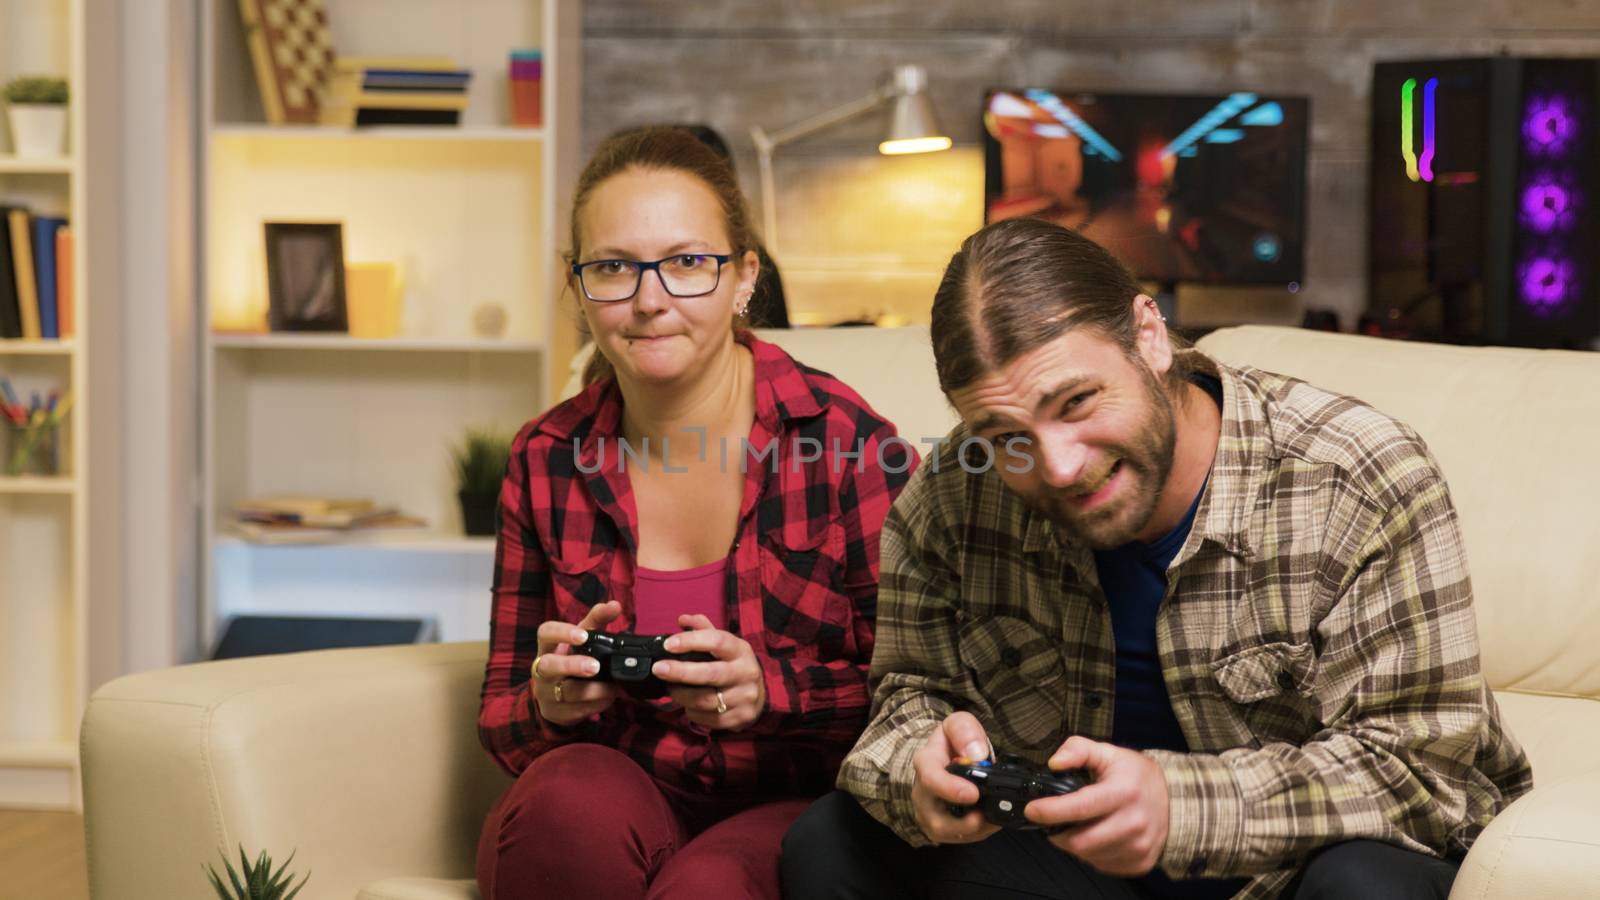 Woman yelling at her boyfriend after losing at video games sitting on couch. Man and woman playing video games.